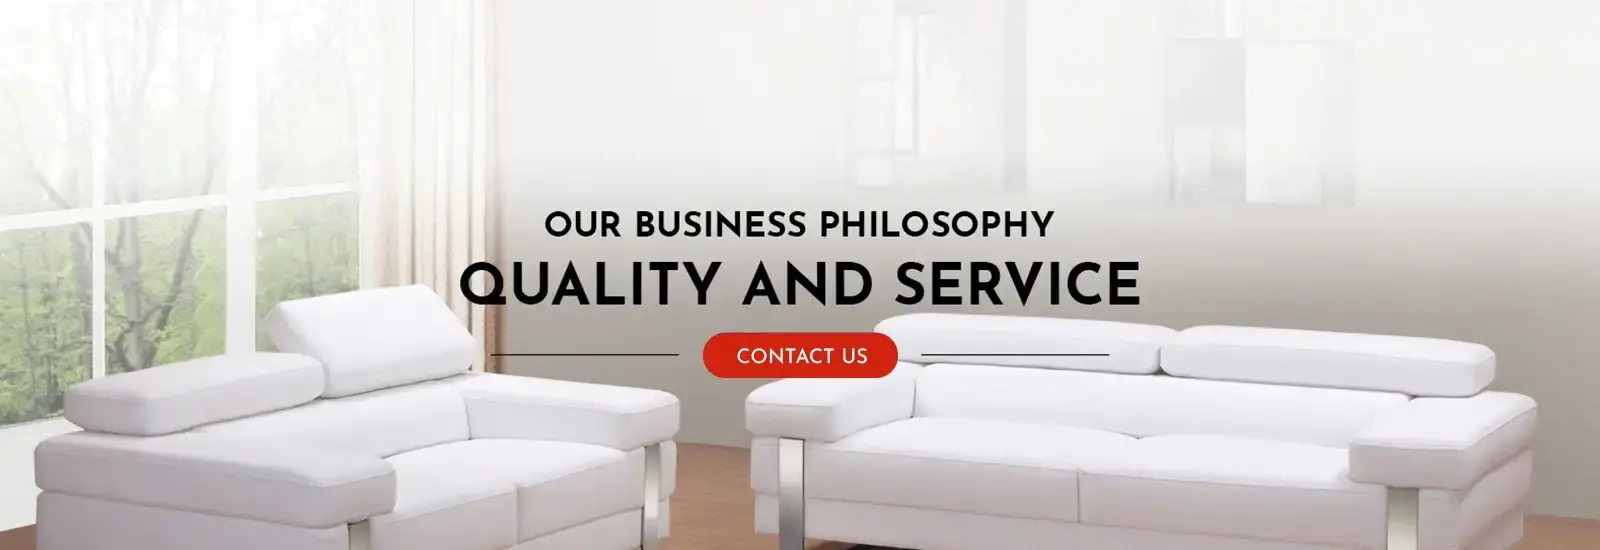 Our Business Philosophy Quality and Service - In Style Furniture Gallery